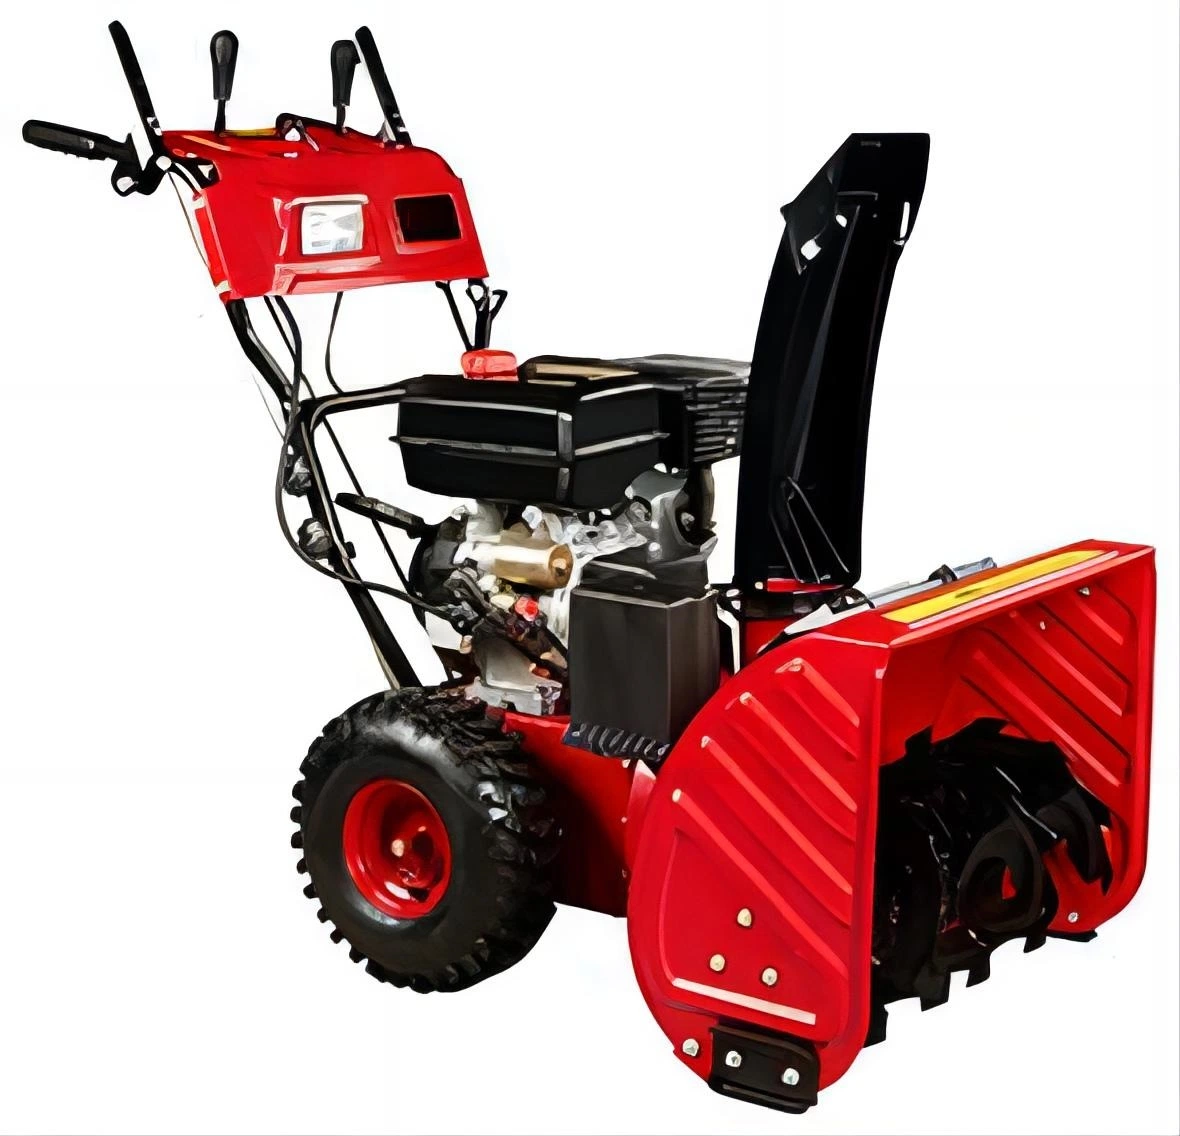 5% Discount-14" AC Electric Starter System-Industry/Professional-190f/7HP-Petrol Engine-Snow Blower/Thrower/Plows-Garden Power-Tool Machines